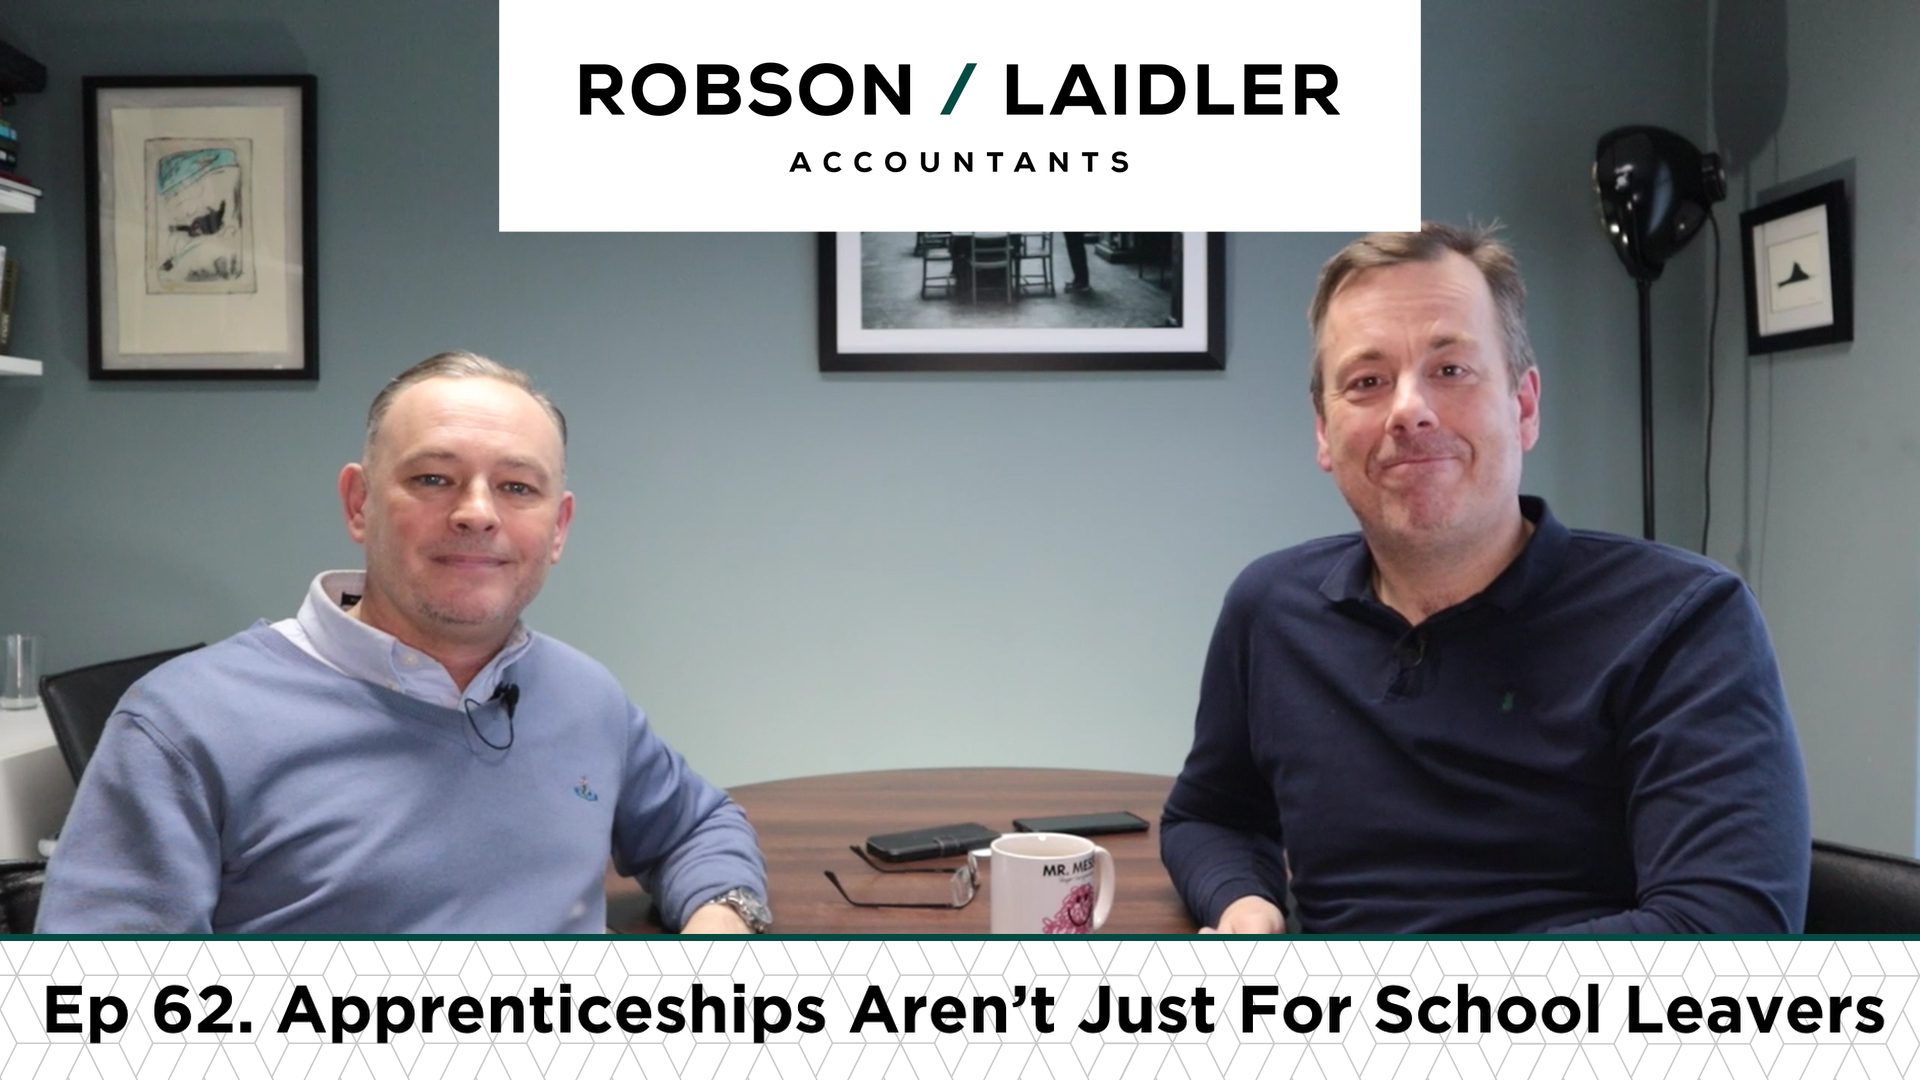 Apprenticeships not just for school leavers podcast